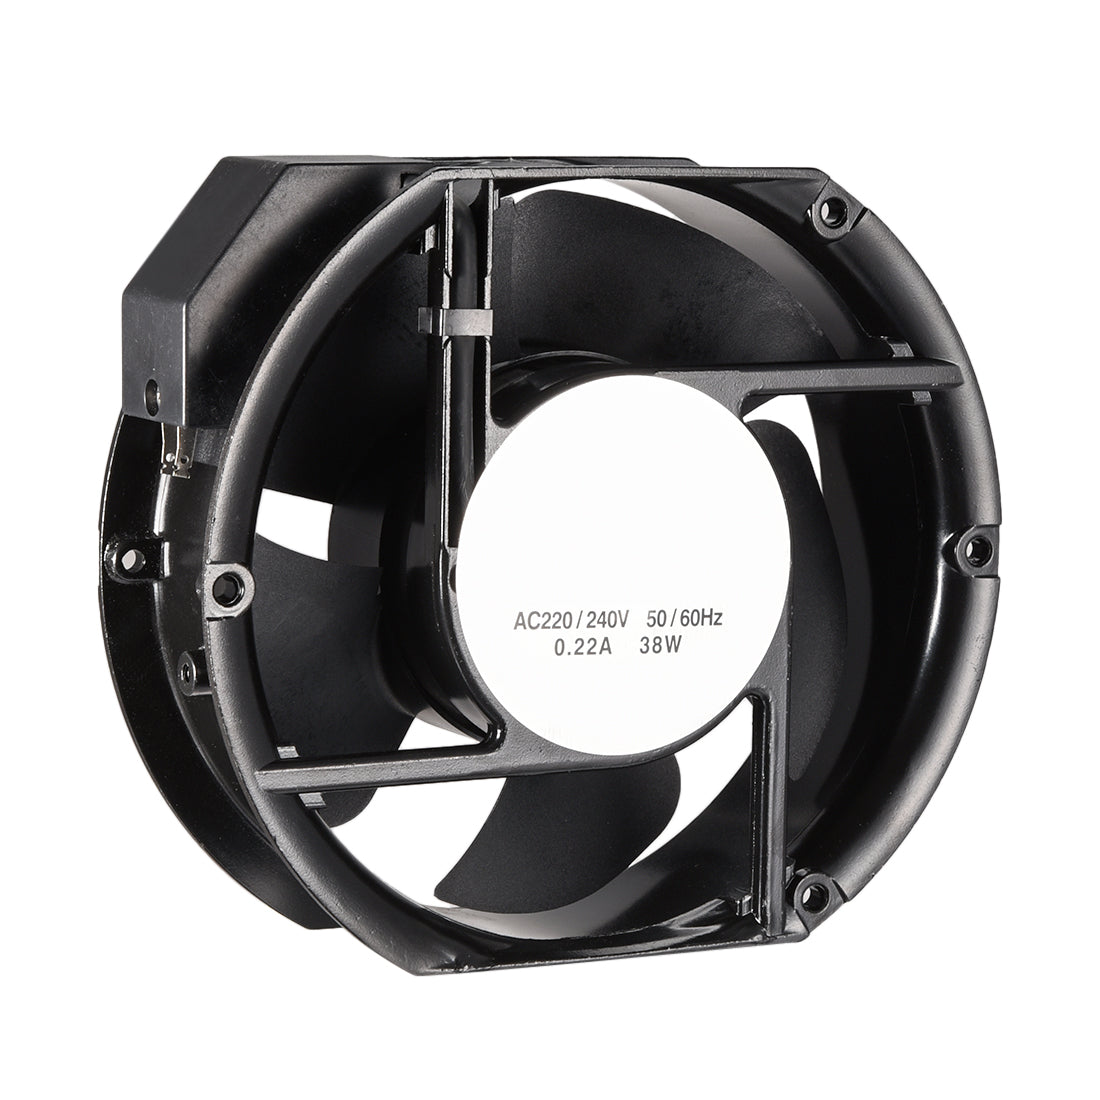 uxcell Uxcell Cooling Fan 172mm x 150mm x 51mm FP-108EX-S1-S AC 220/240V 0.22A Long Life Sleeve Bearings